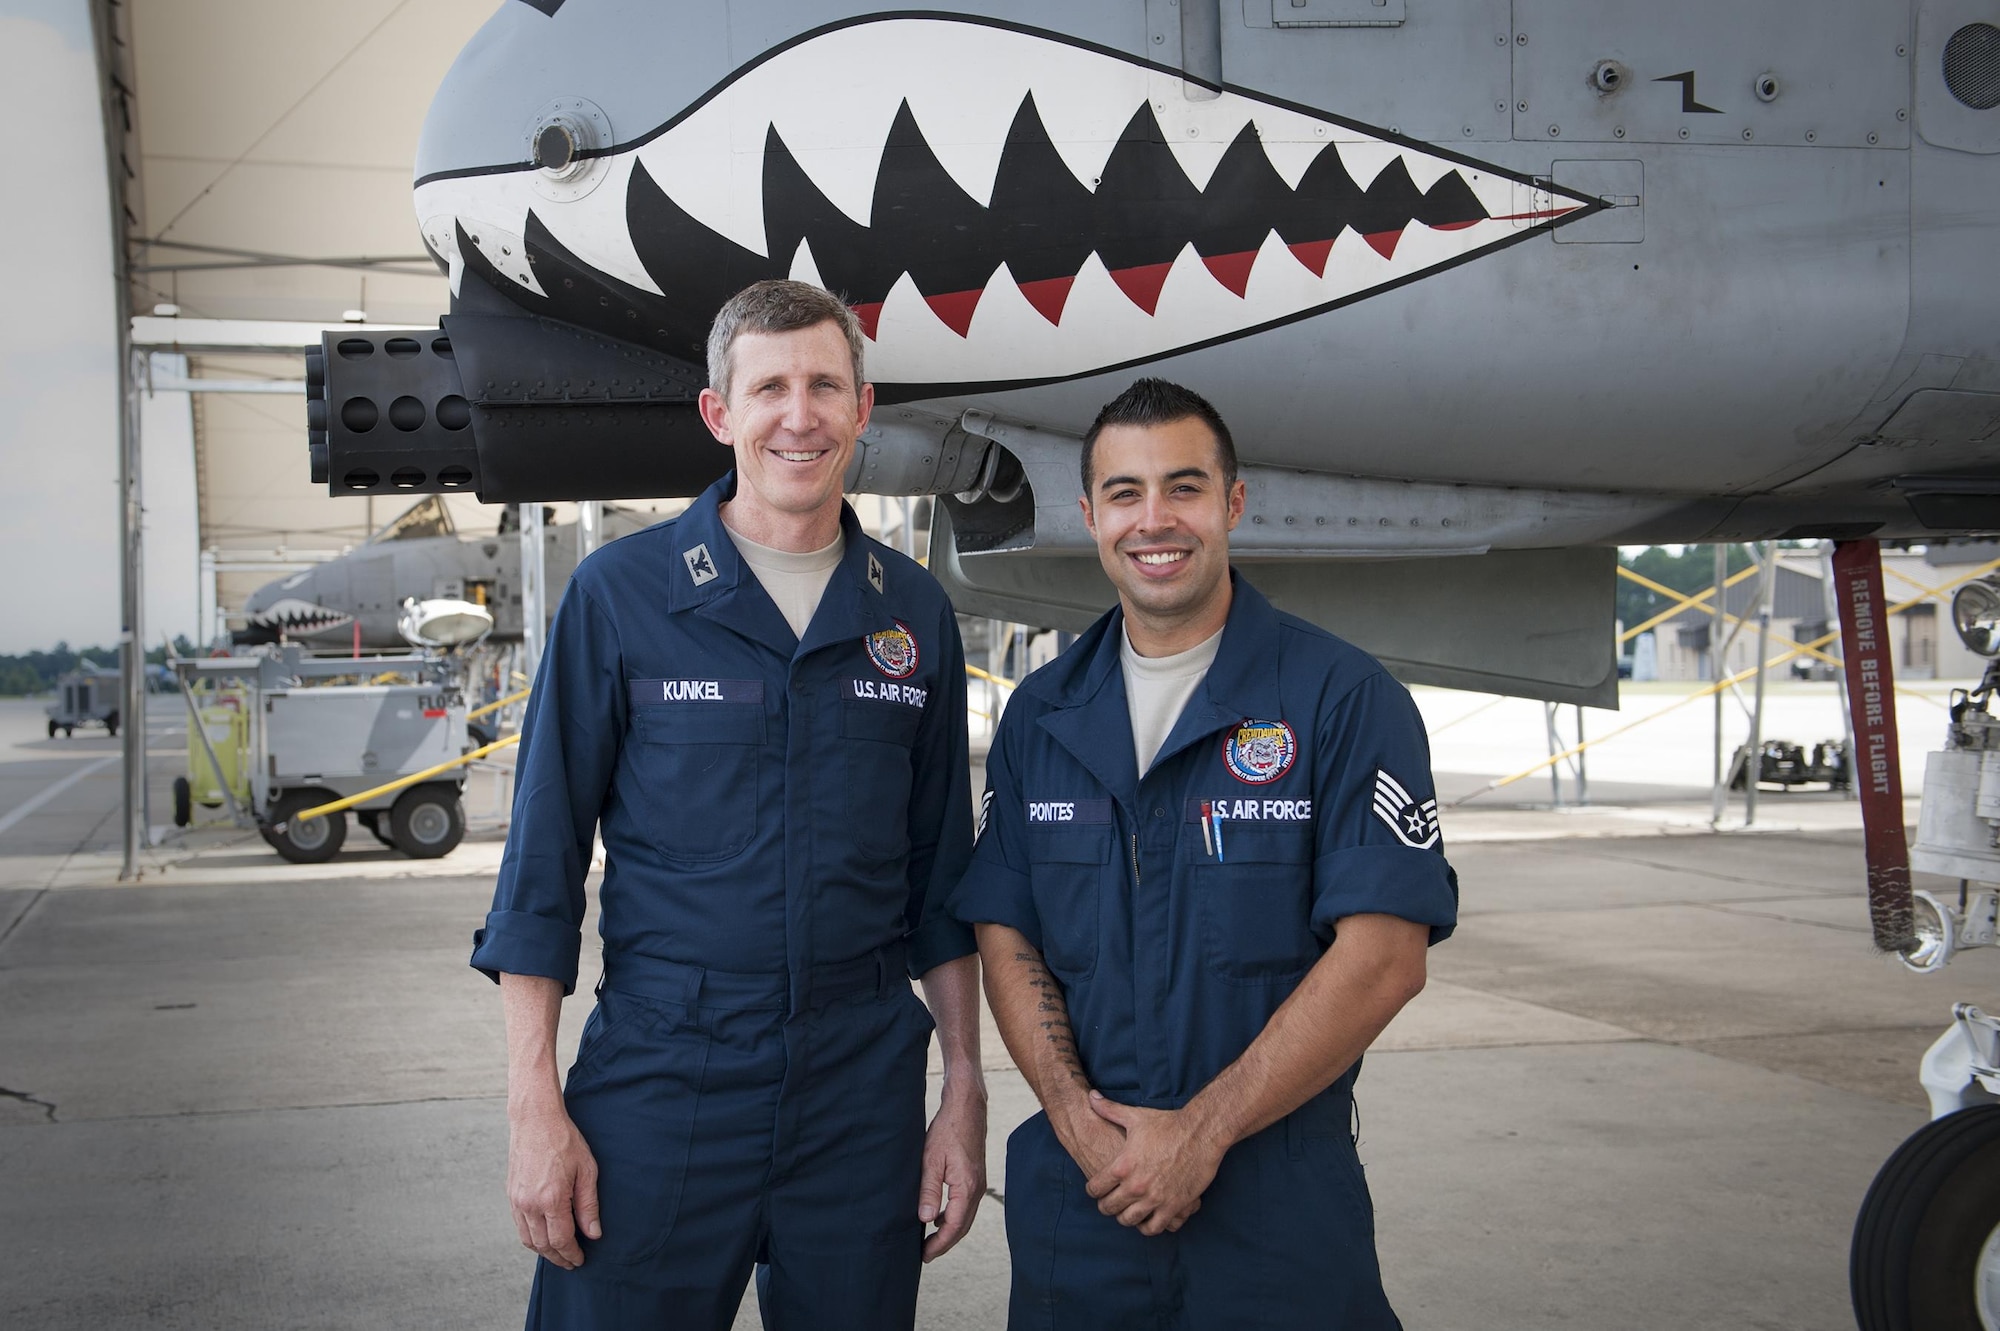 U.S. Air Force Col. Thomas Kunkel, 23d Wing commander, and Staff Sgt. Brian Pontes, 75th Aircraft Maintenance Unit crew chief, pose for a photo, June 27, 2016, at Moody Air Force Base, Ga. During his visit to the 23d Aircraft Maintenance Squadron, Kunkel wore coveralls to blend in and embrace the day-to-day life of a crew chief. (U.S. Air Force photo by Airman 1st Class Lauren M. Hunter/Released)